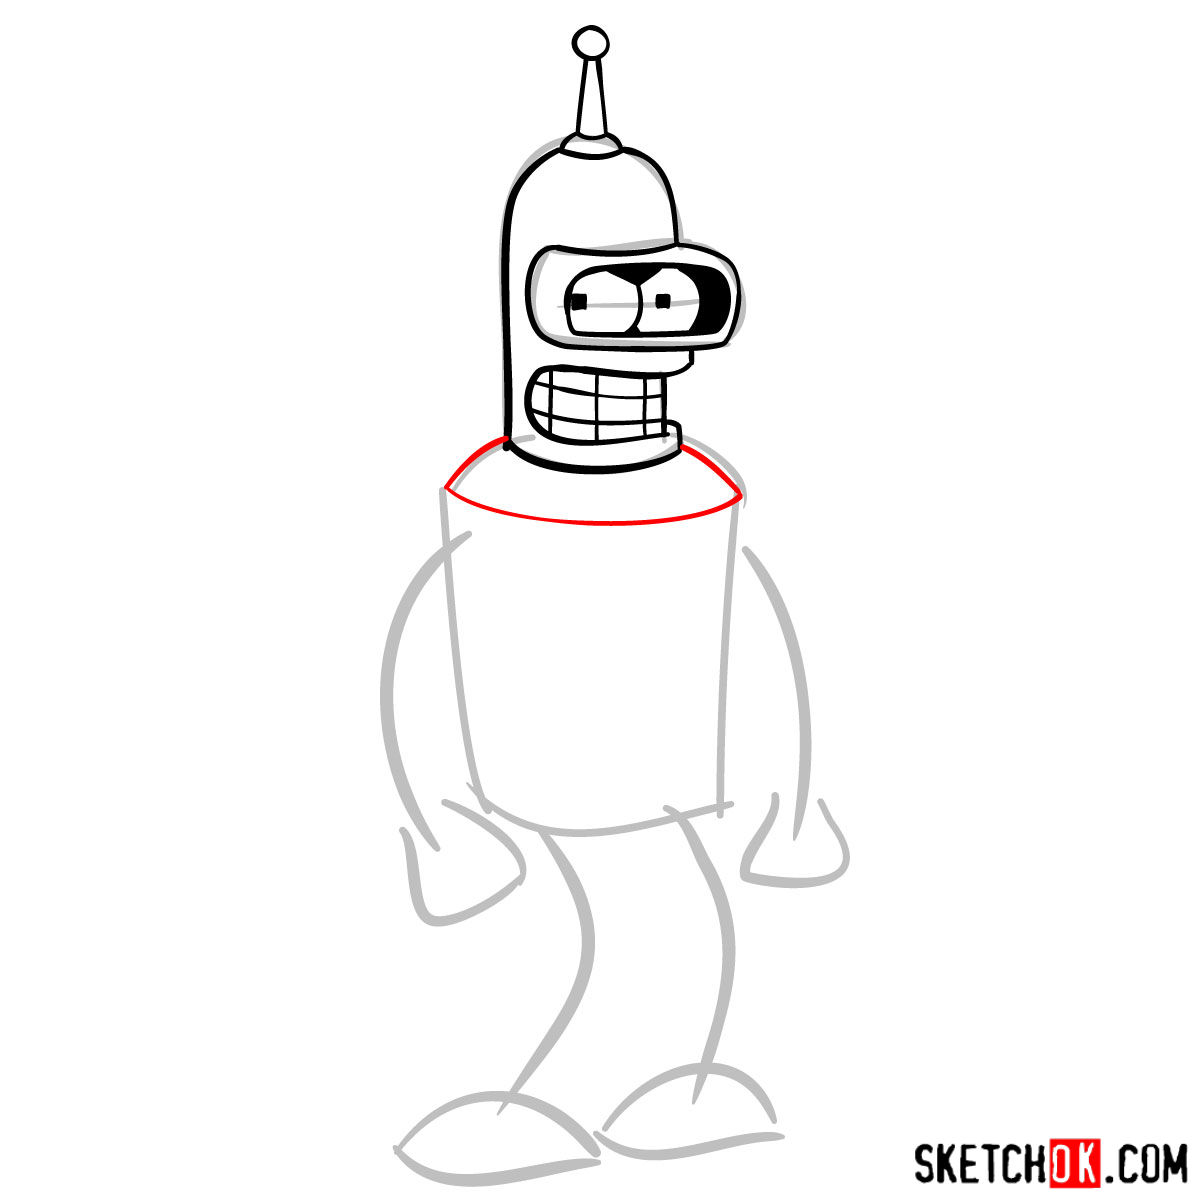 How to draw Bender Rodríguez - step 05